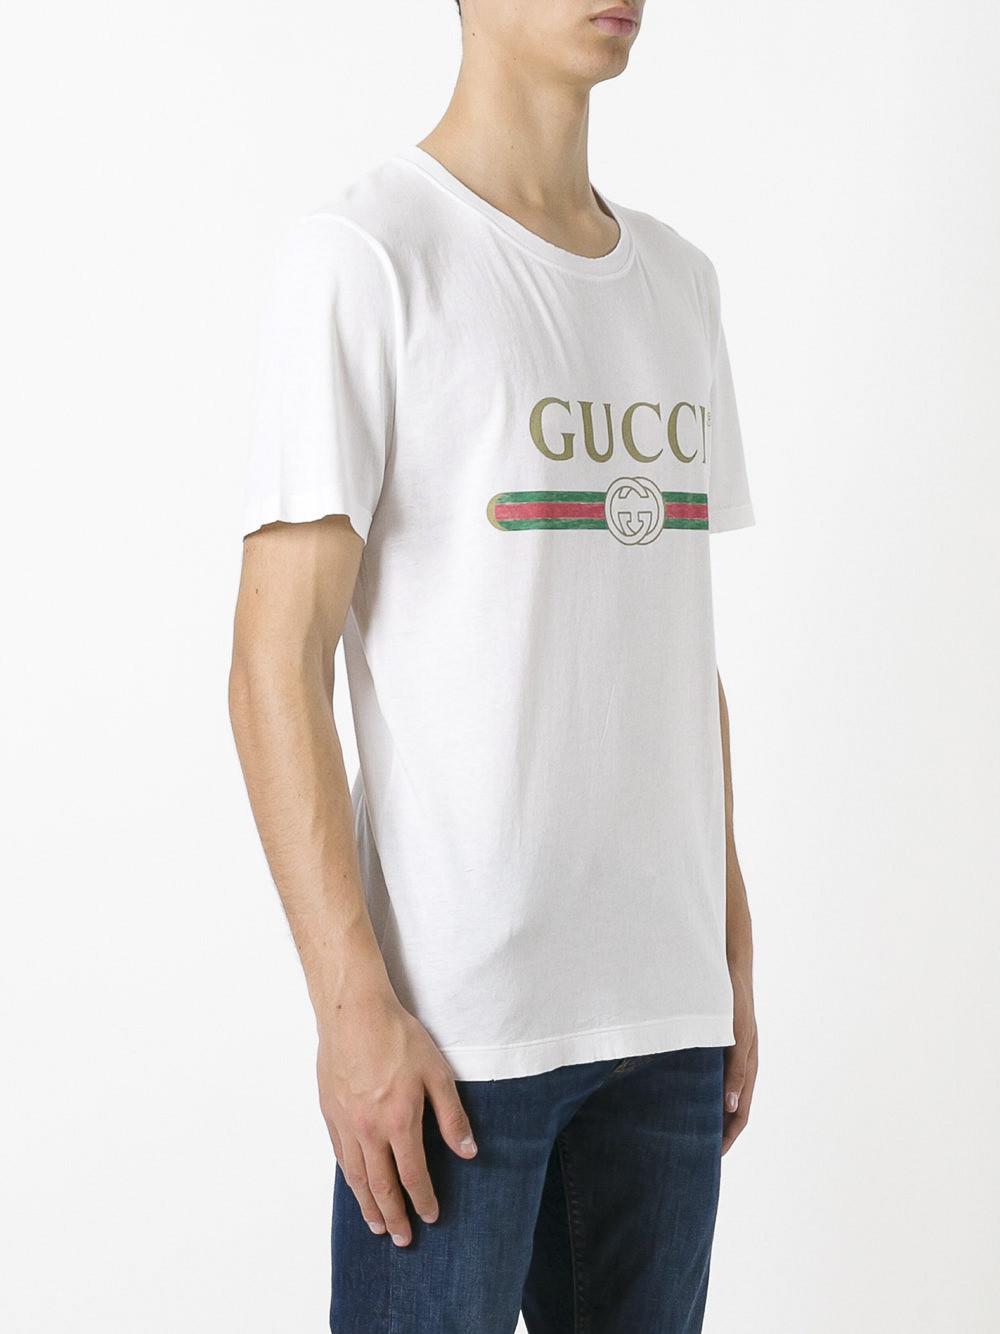 Lyst - Gucci Washed T-shirt With Print in Black for Men